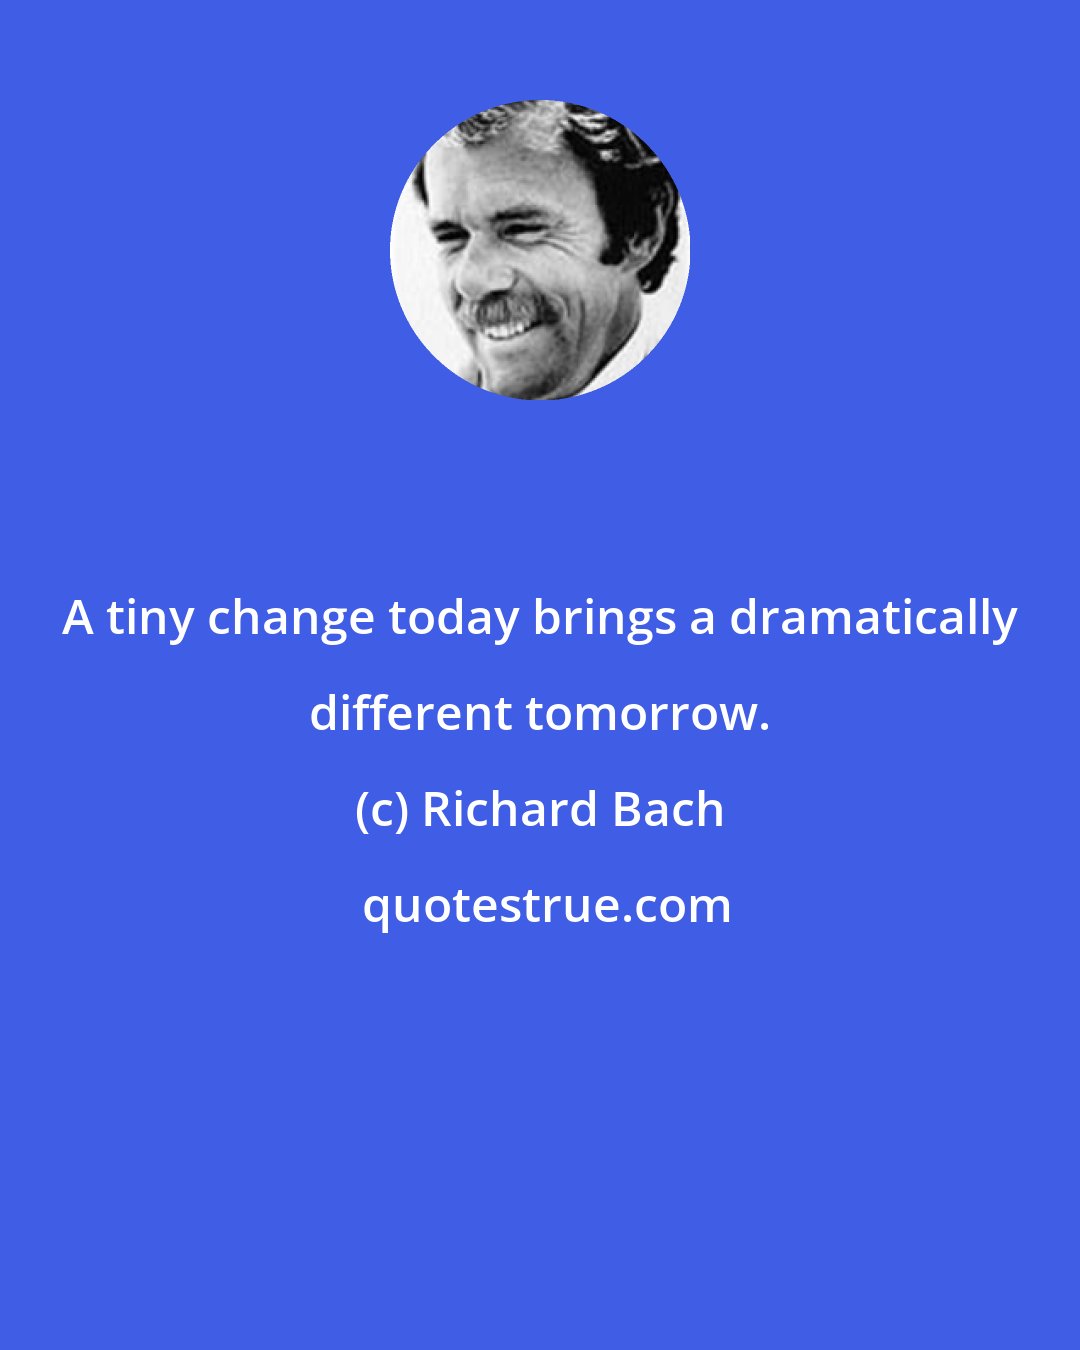 Richard Bach: A tiny change today brings a dramatically different tomorrow.